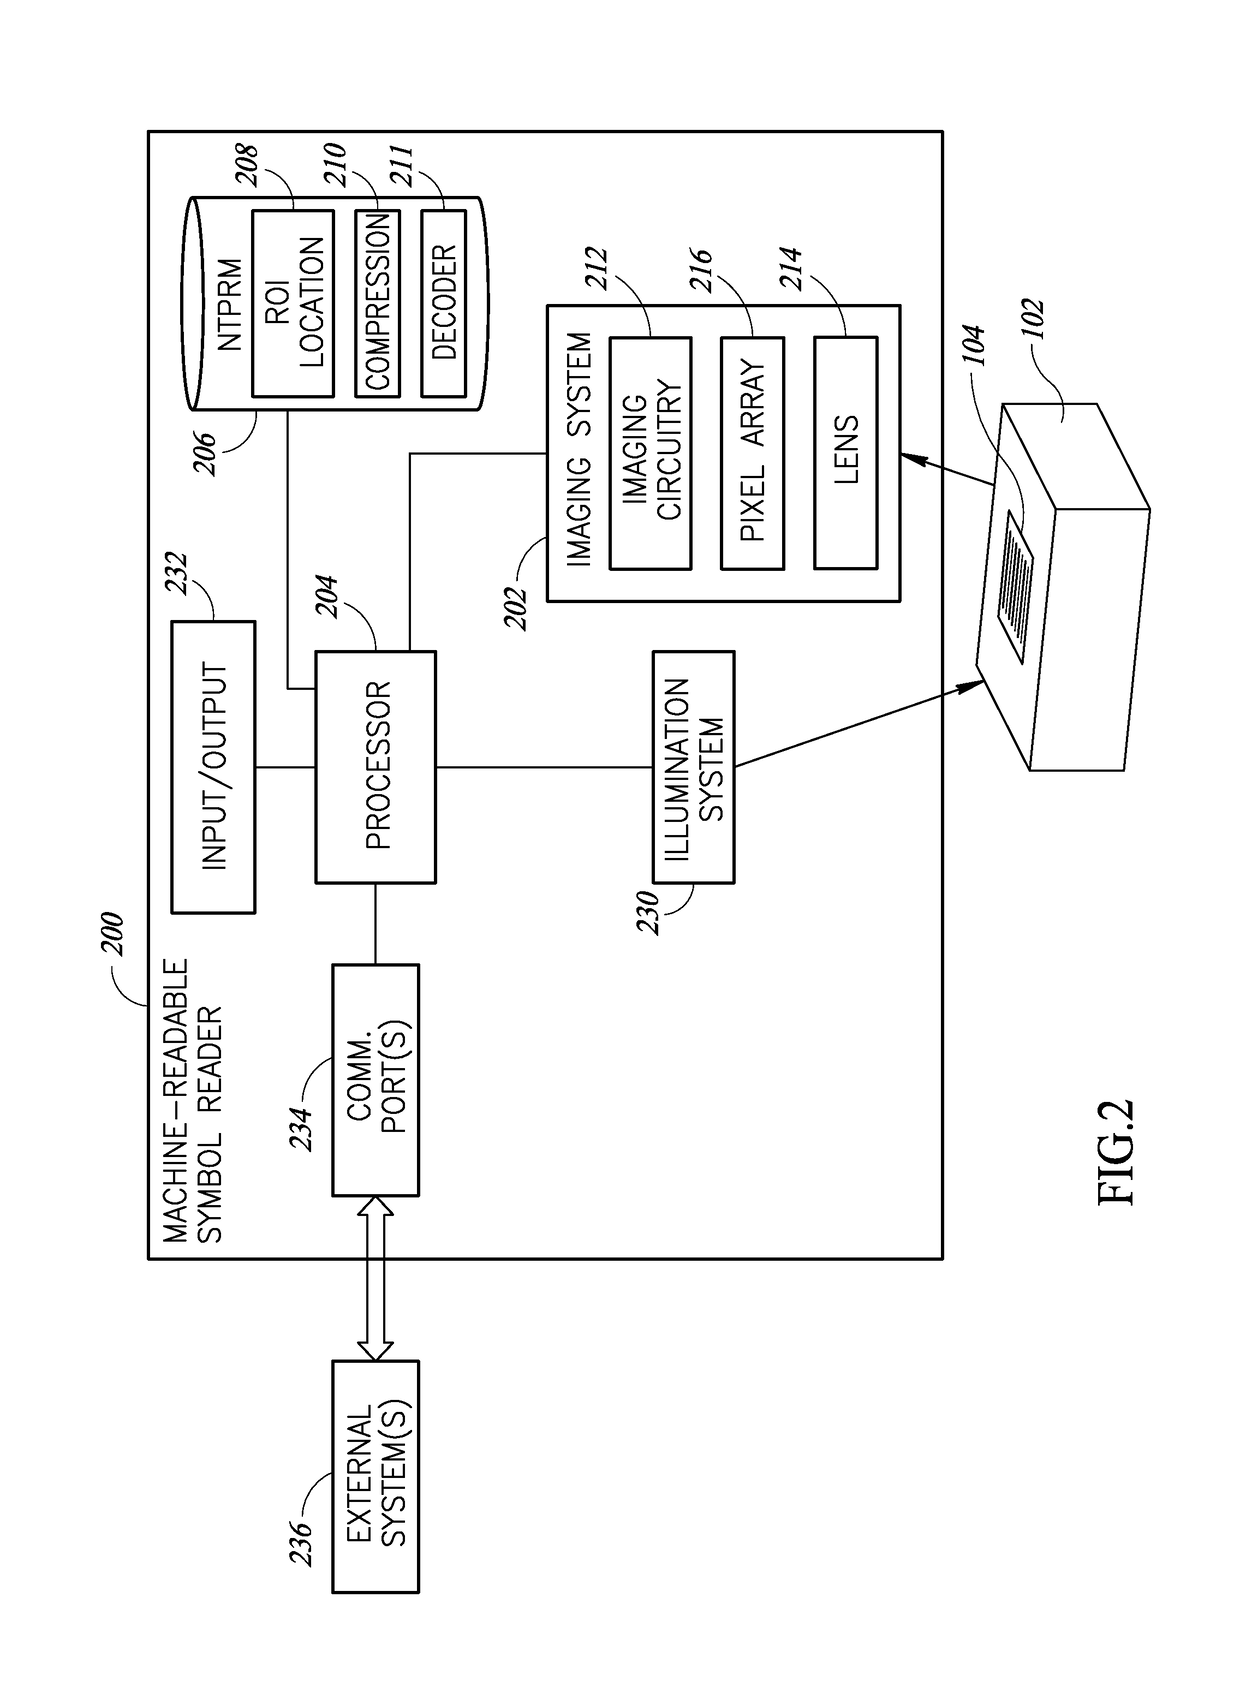 Region of interest location and selective image compression